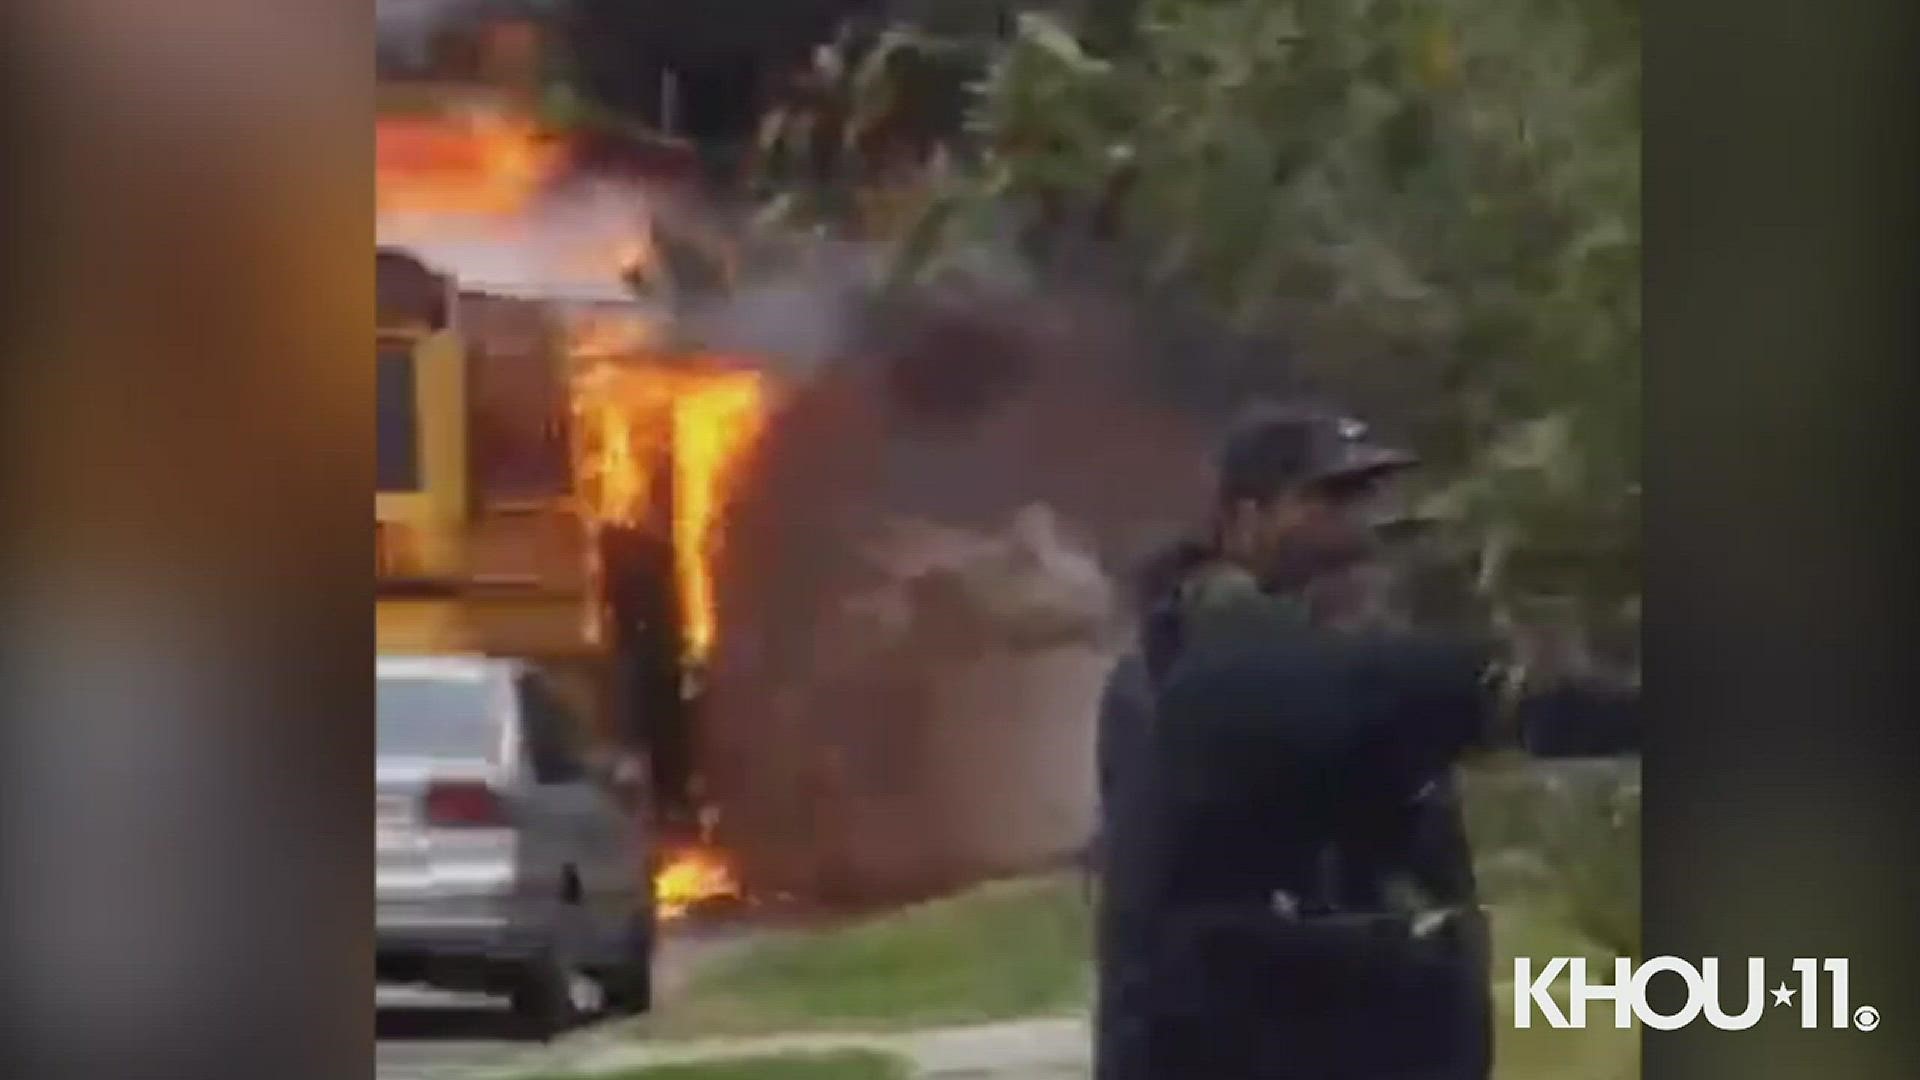 A Dickinson ISD bus driver got her students out safely after their school bus caught fire in a Galveston County subdivision Wednesday night.